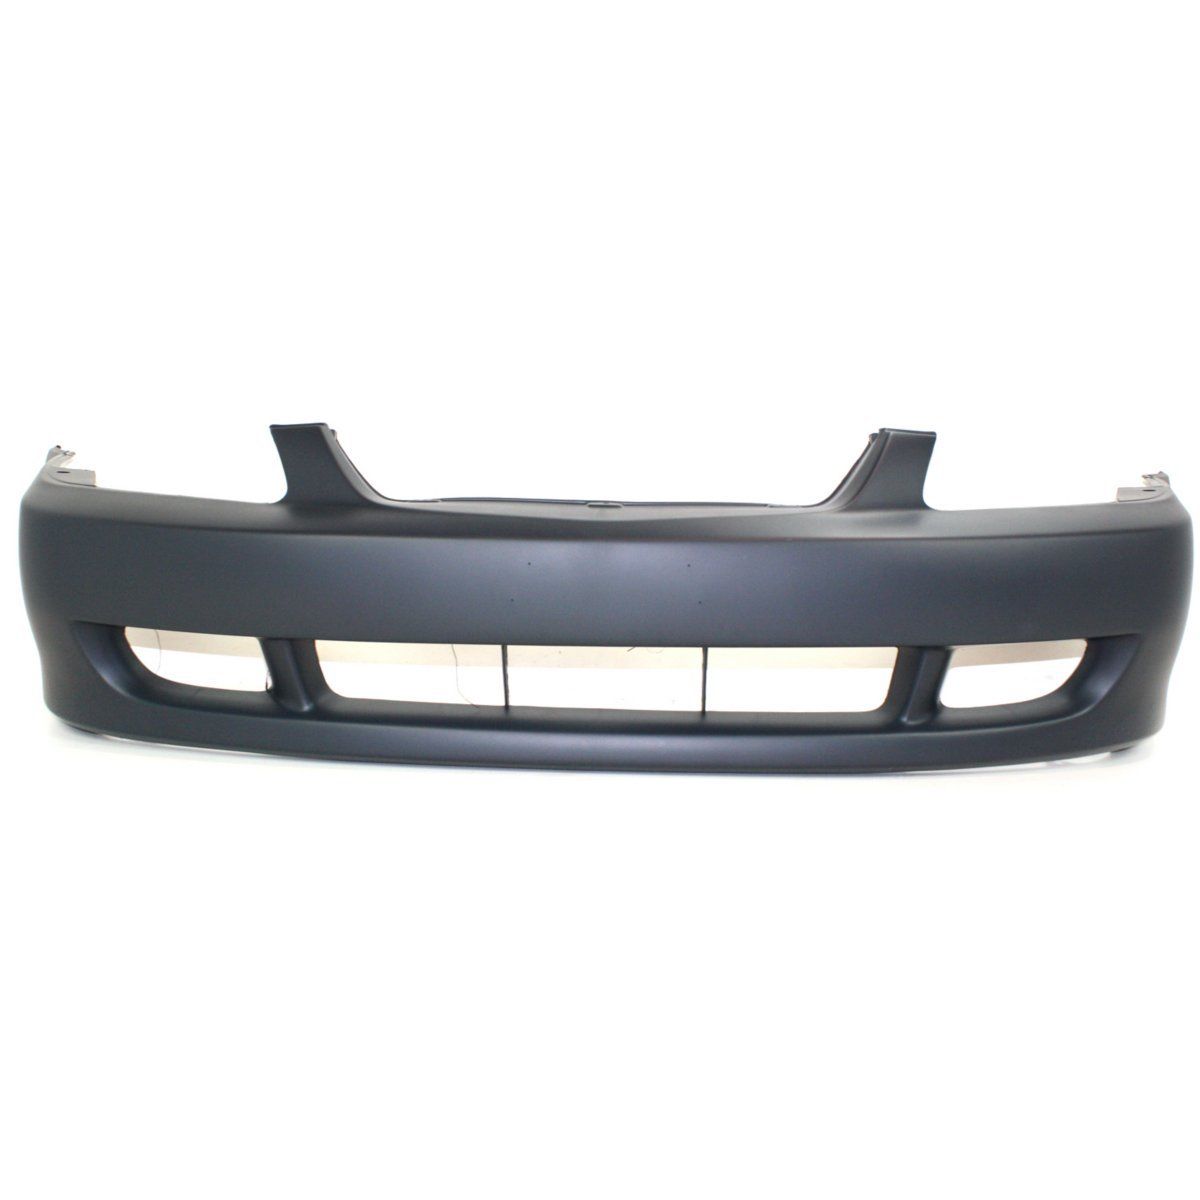 1999-2000 MAZDA 323/PROTEGE Front Bumper Cover Painted to Match